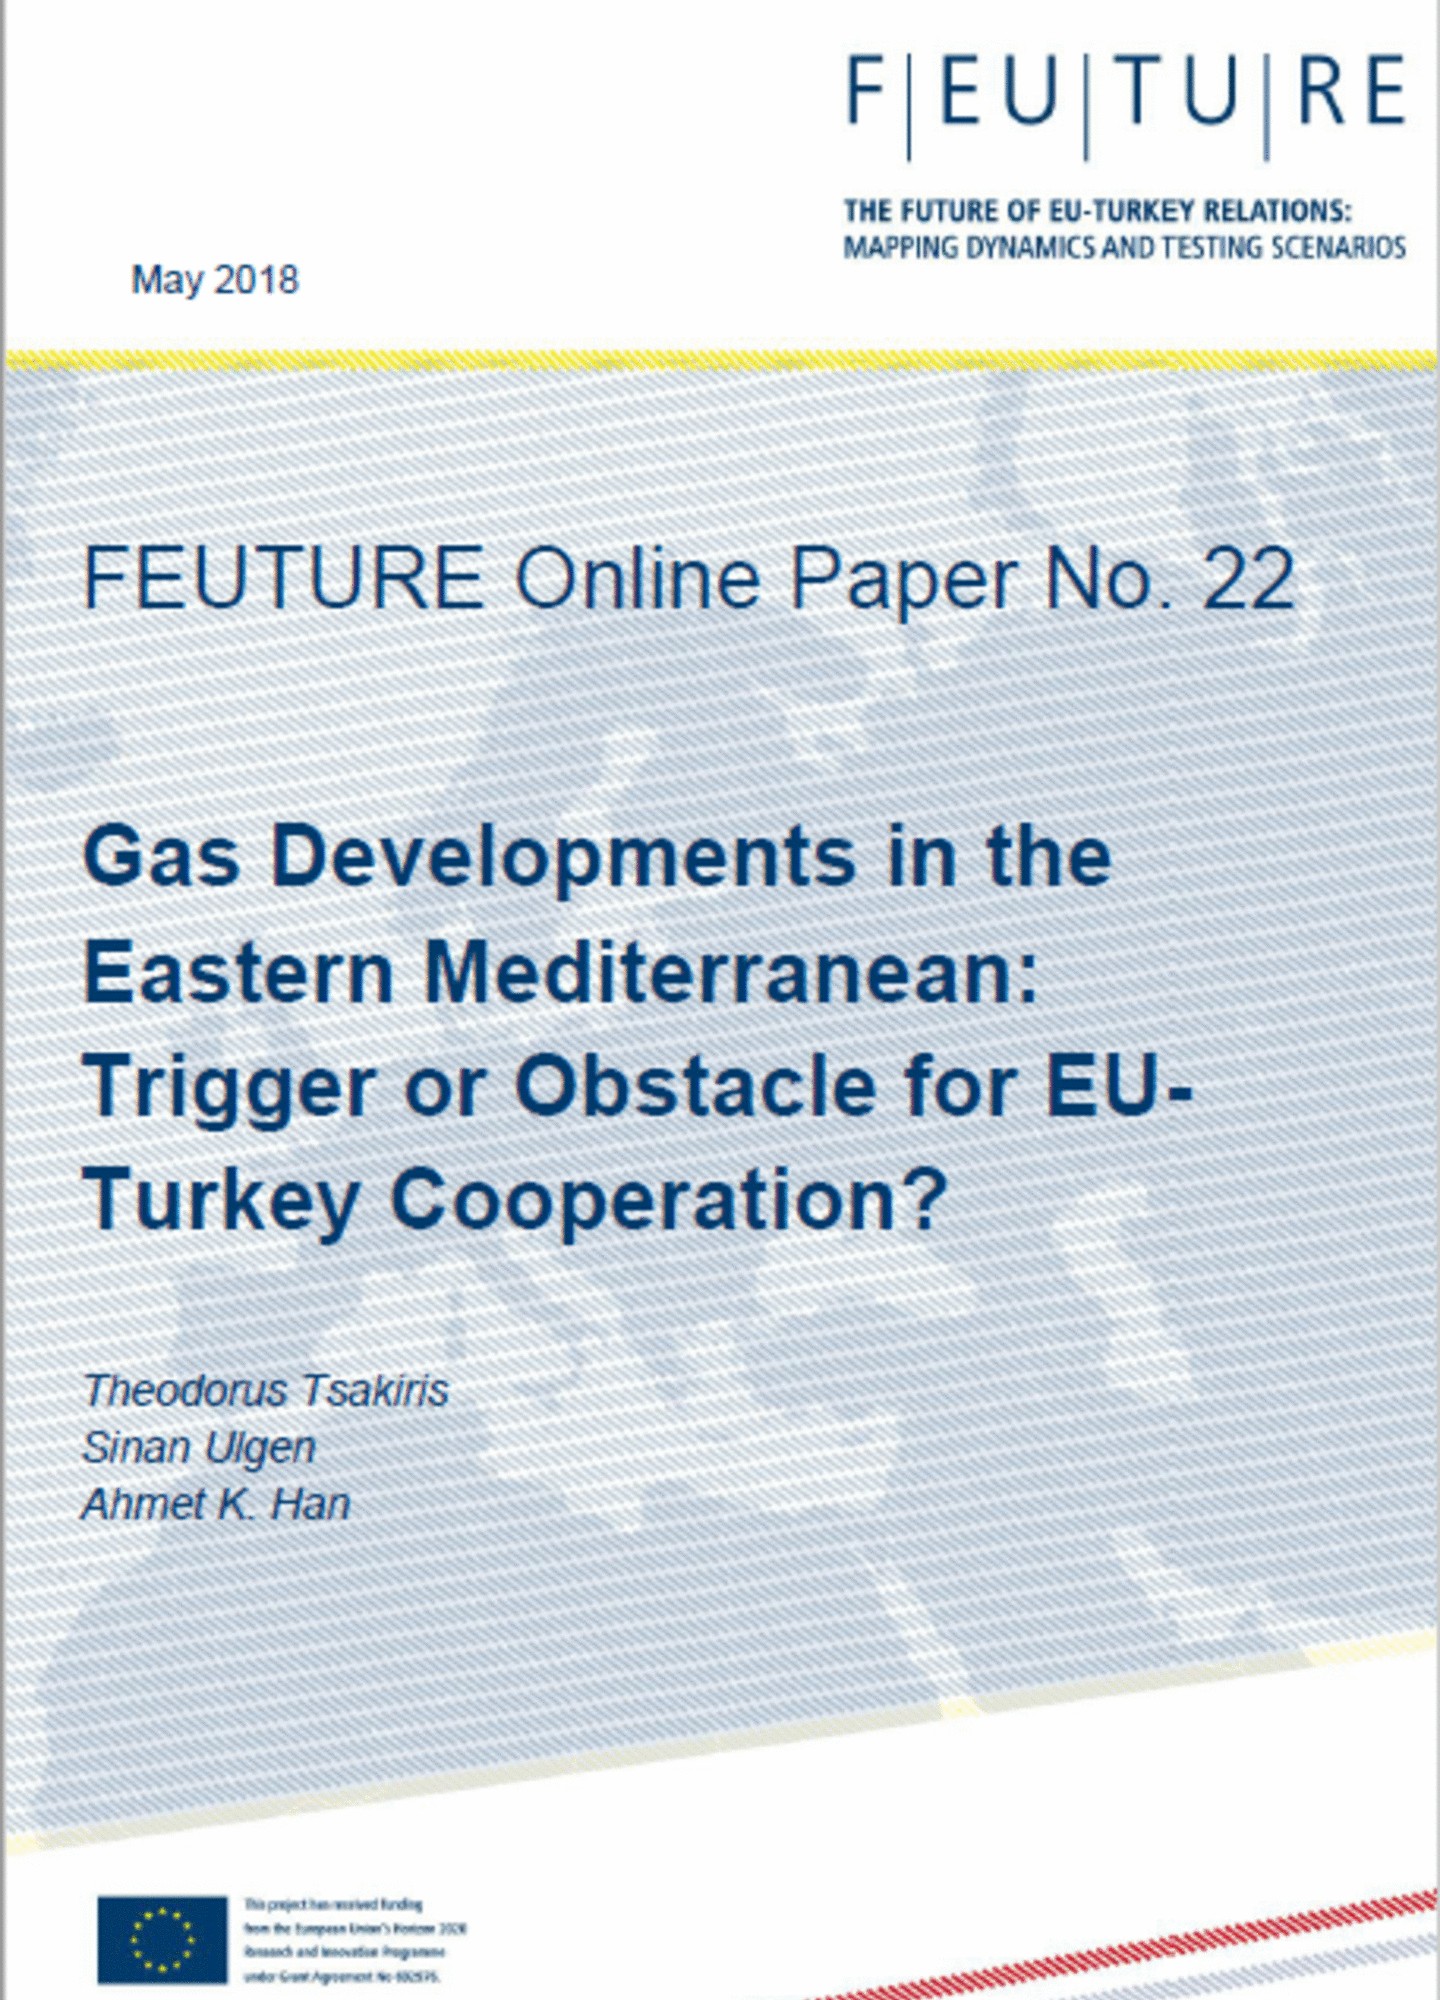 Gas Developments in the Eastern Mediterranean: Trigger or Obstacle for EU-Turkey Cooperation?